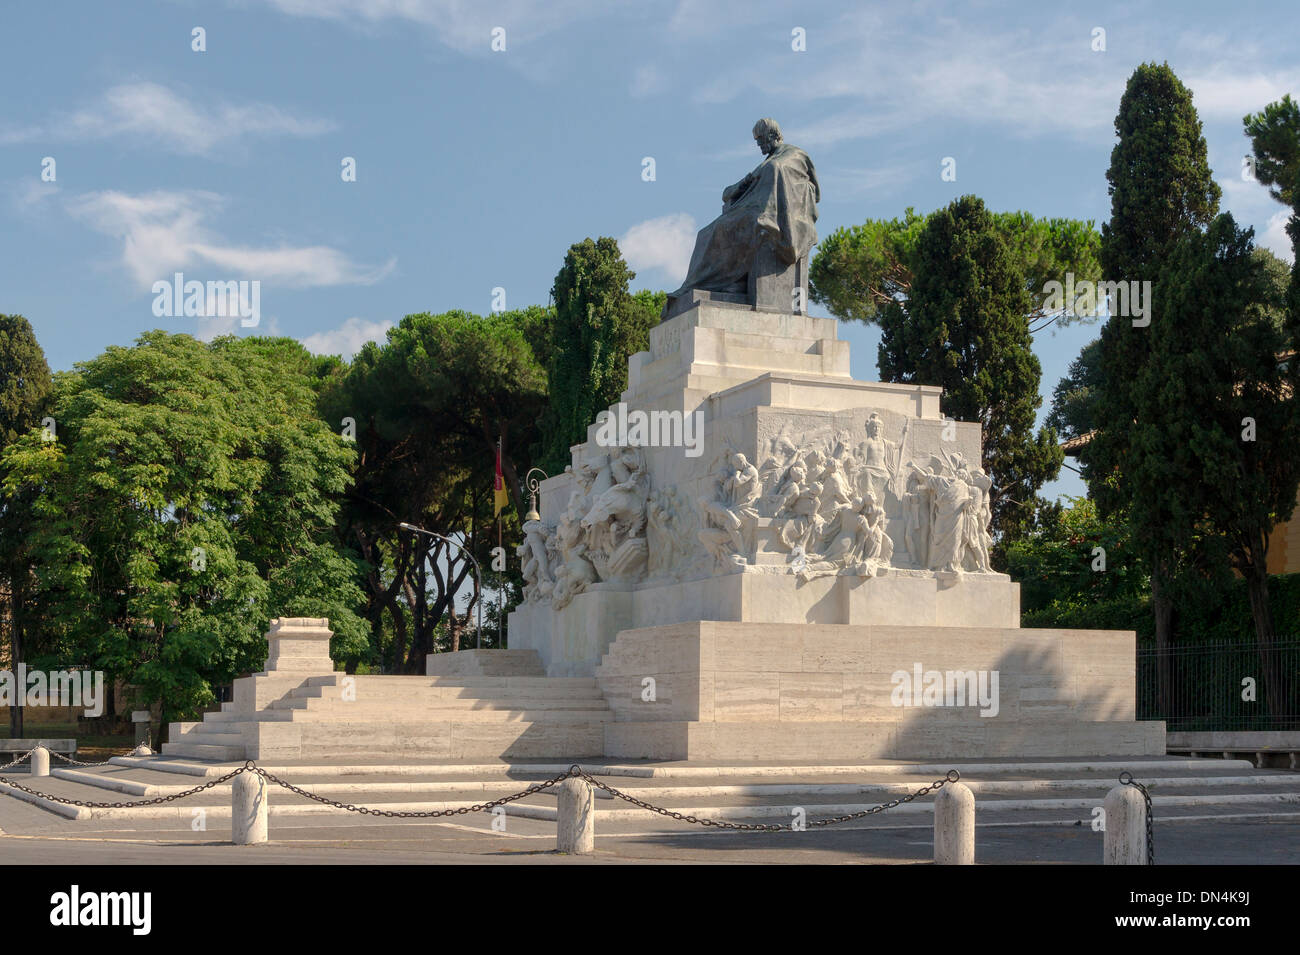 The monument to Guiseppe Mazzini, Rome, Italy. Stock Photo